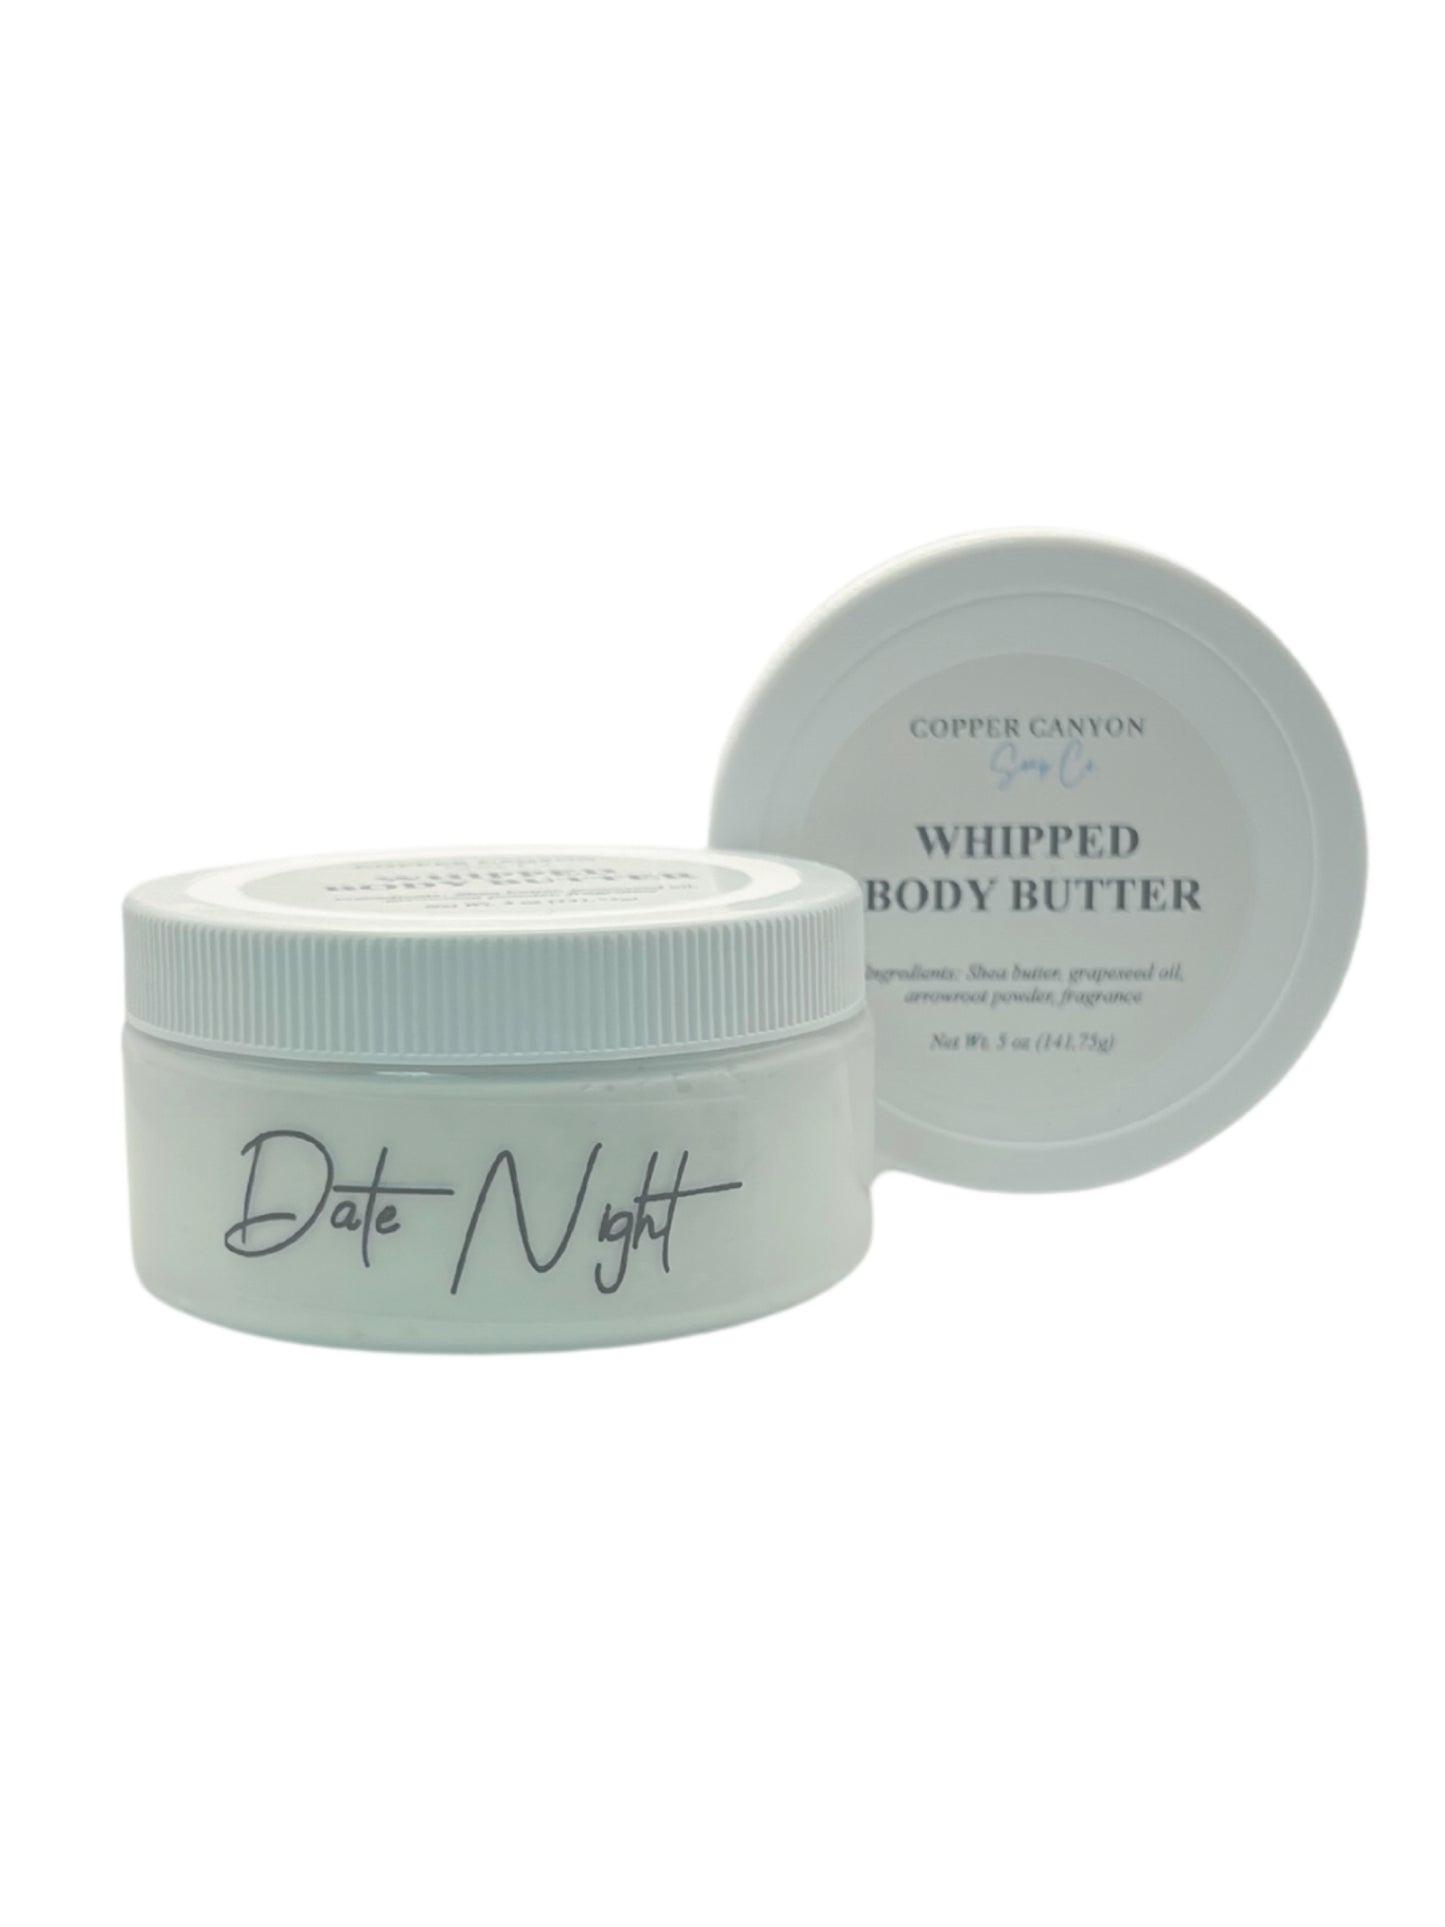 Date Night Whipped Body Butter